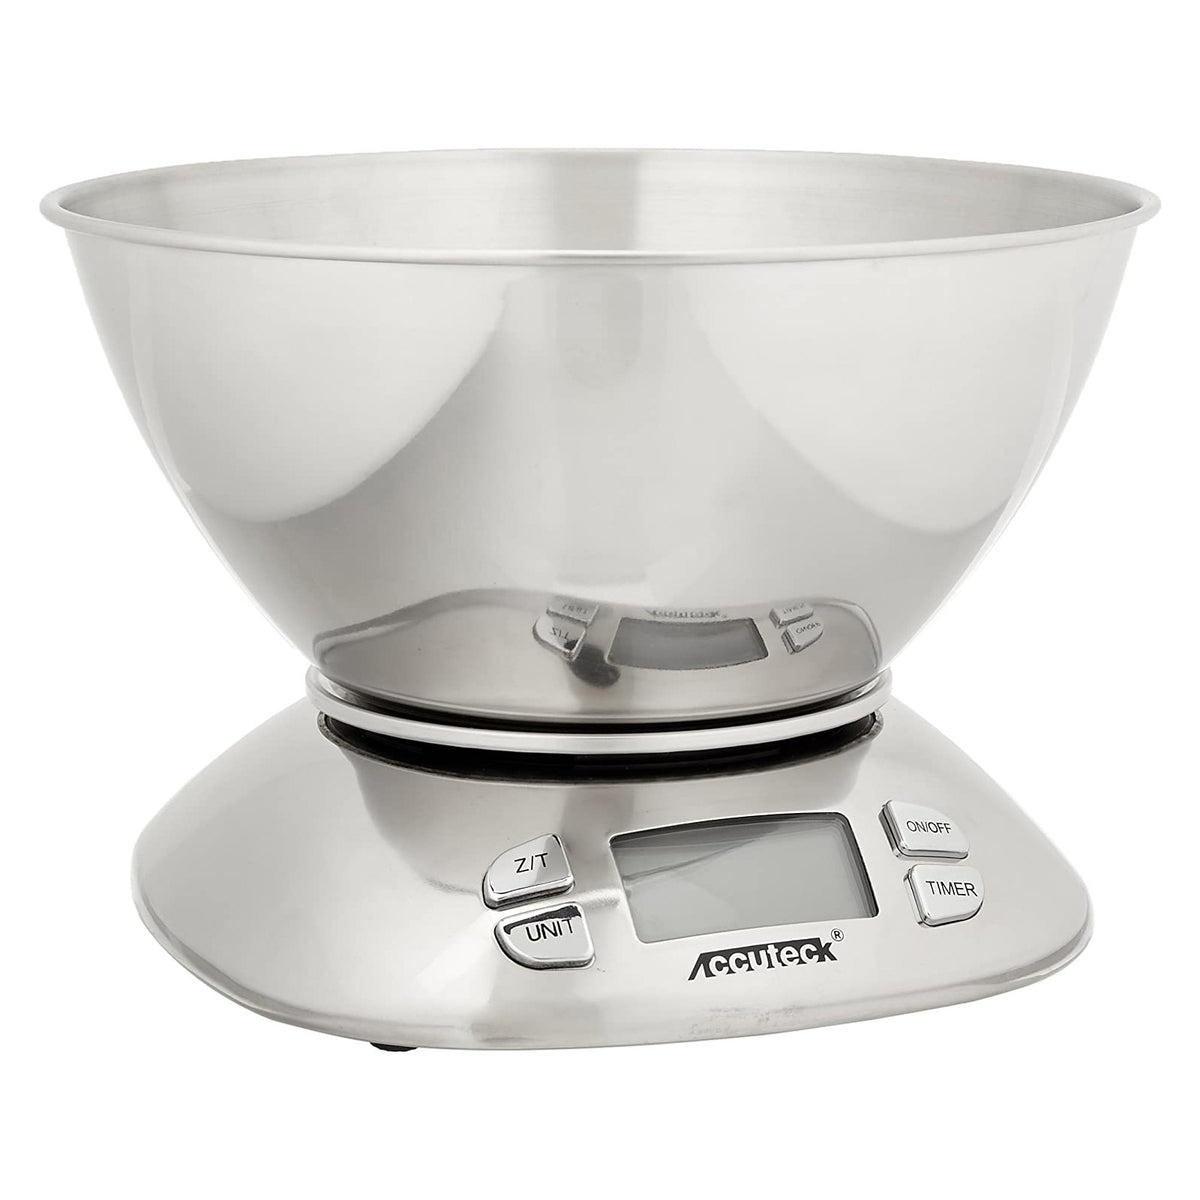 Accuteck A-KC12 Digital Kitchen Scale with Mixing Bowl (12 lbs